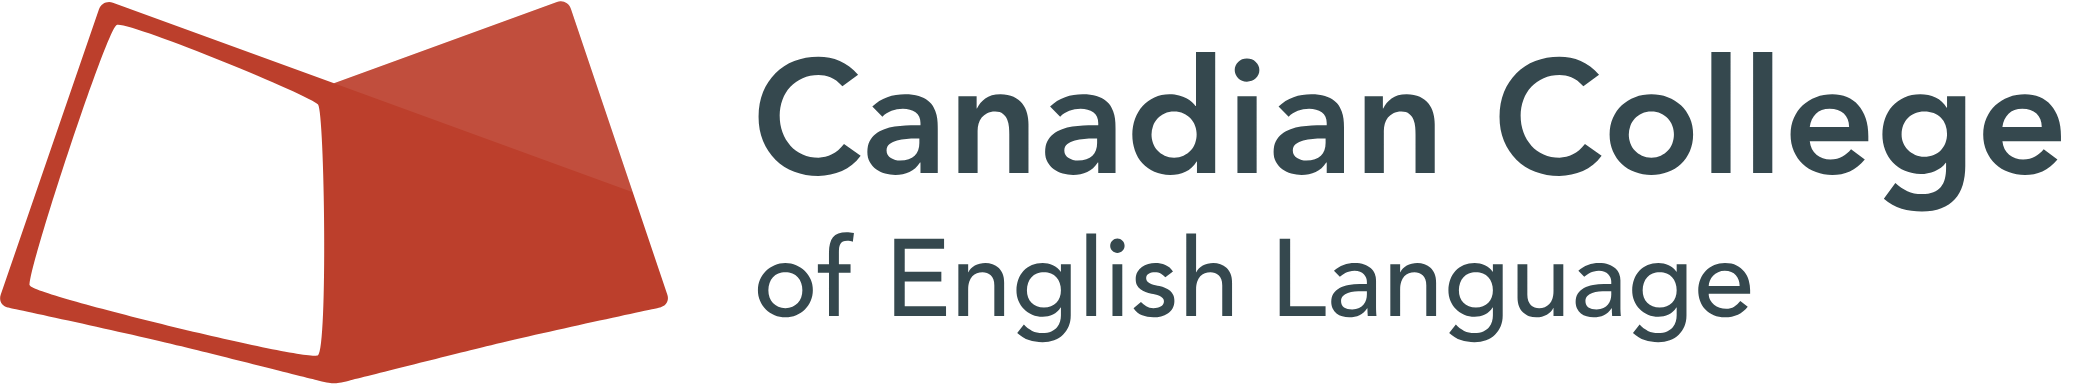 CCEL（Canadian College of English Language）